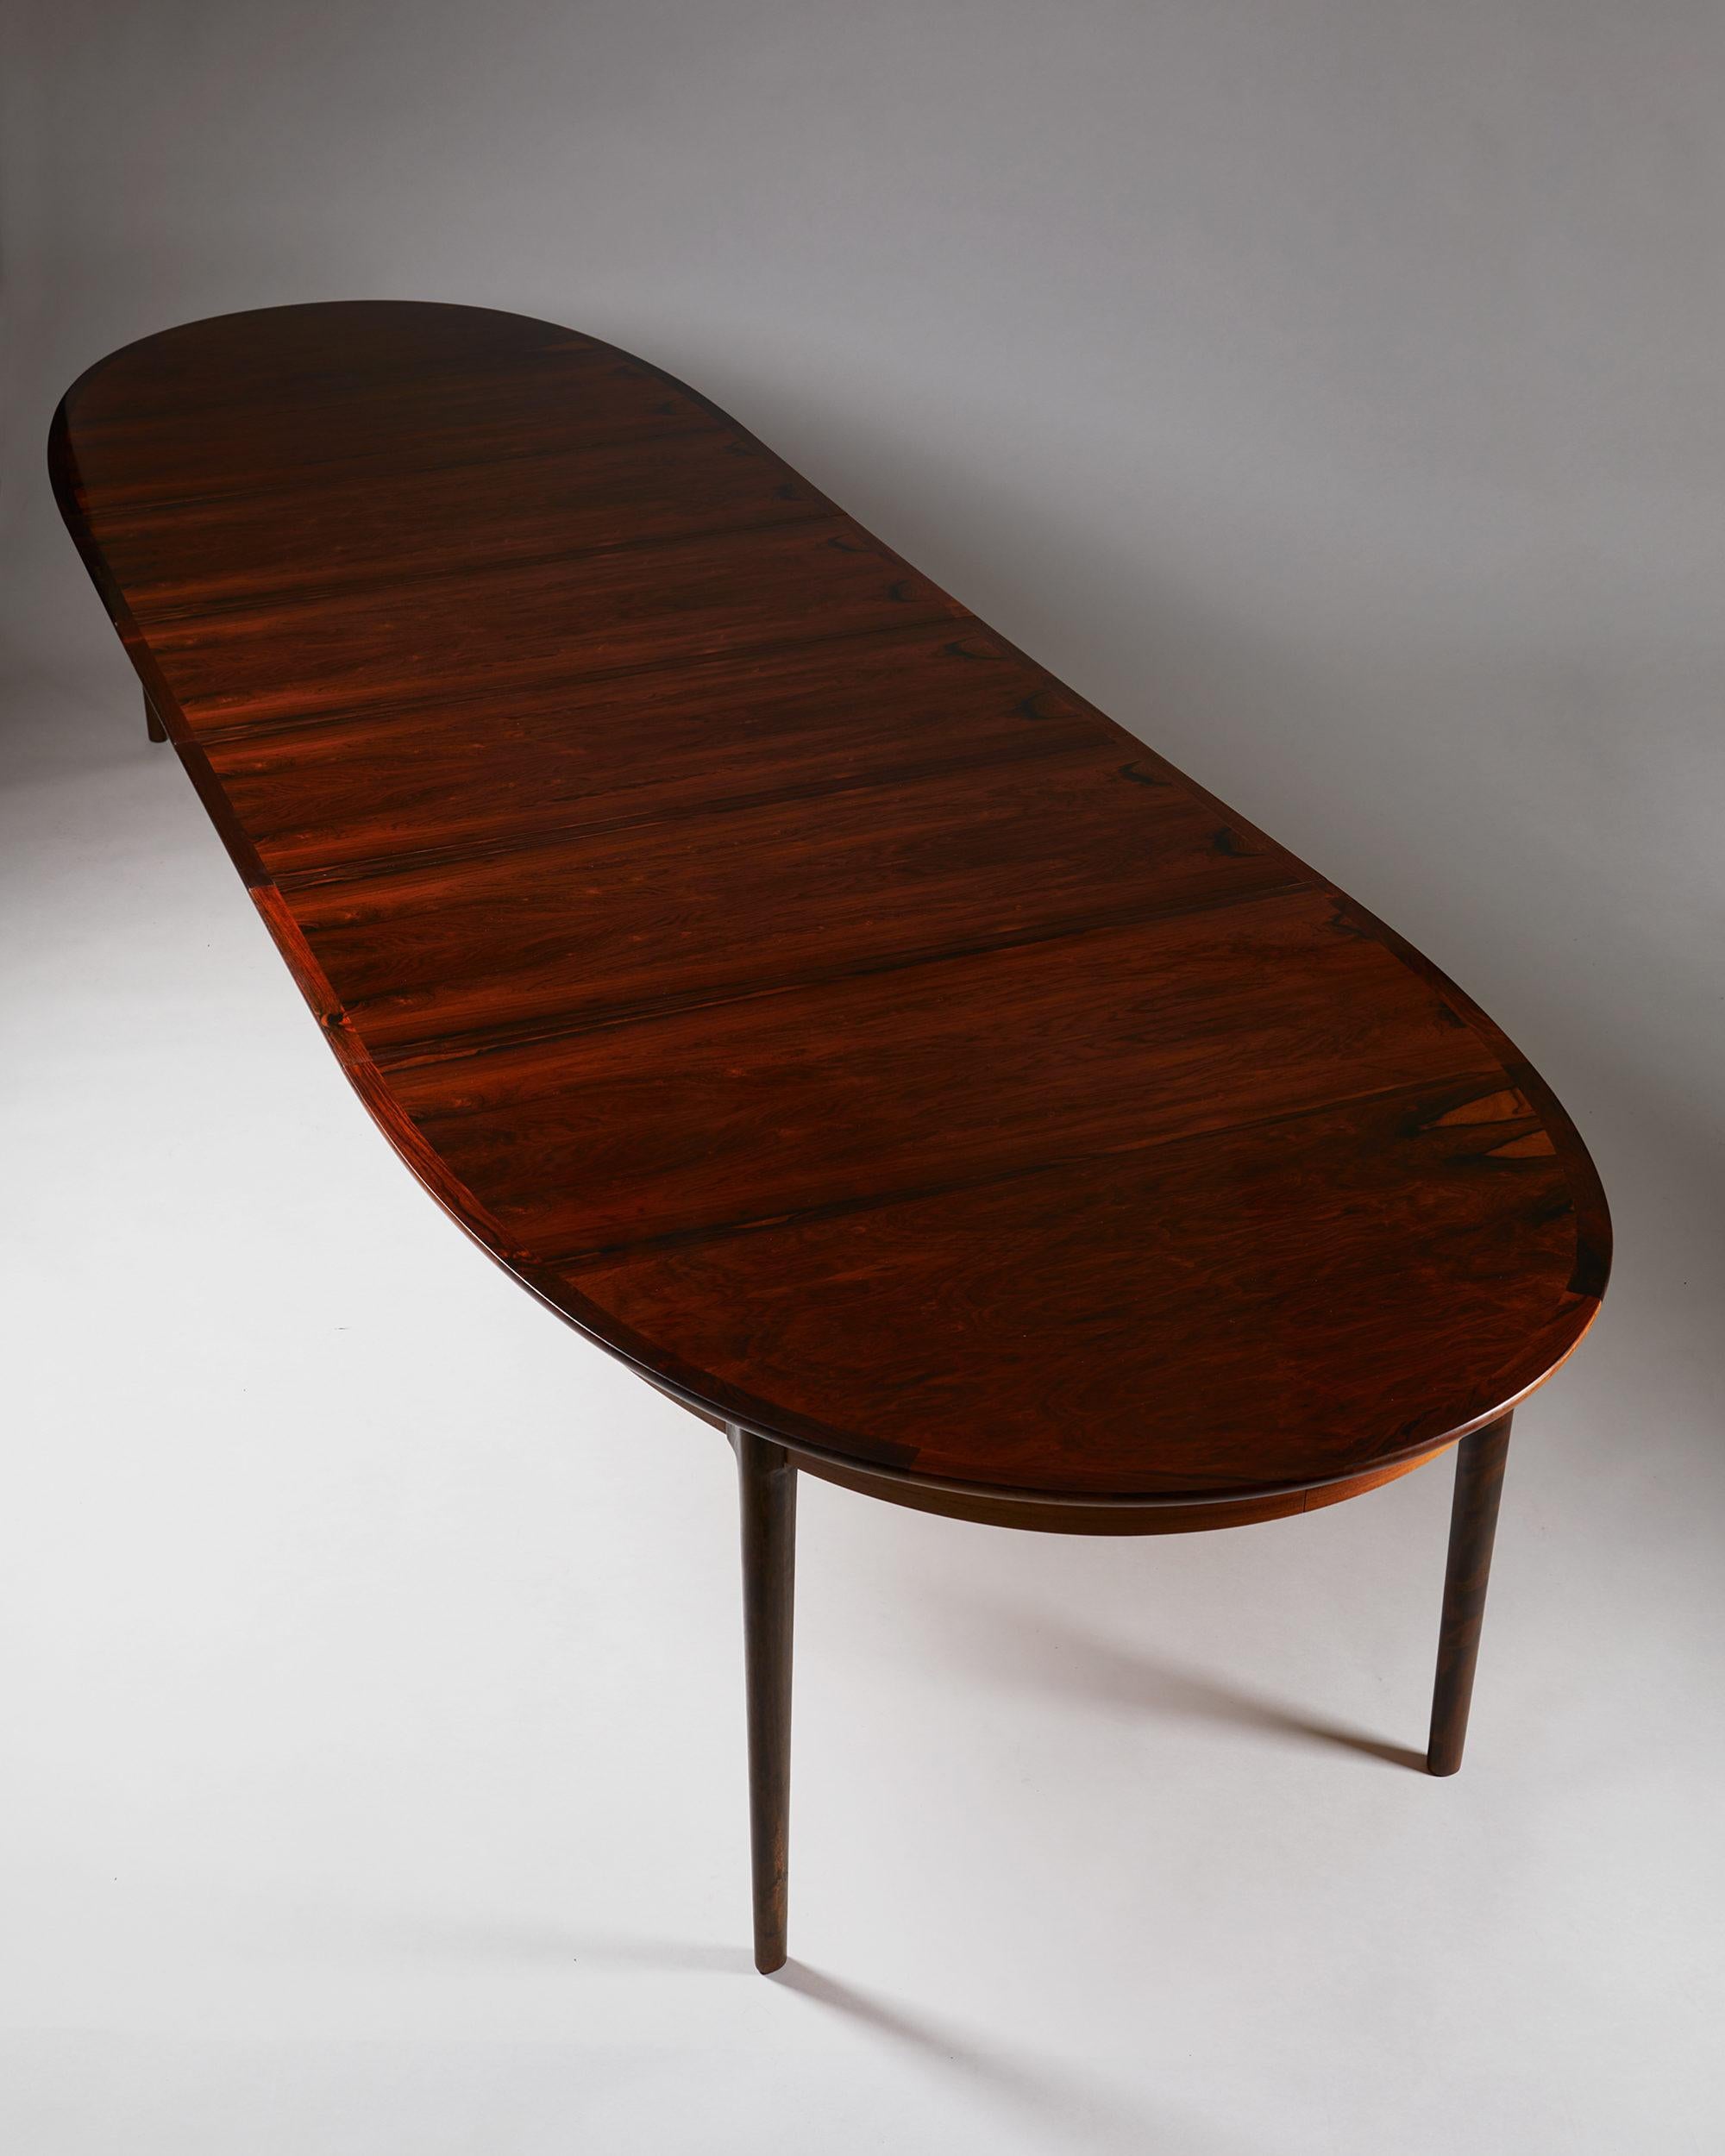 Mid-20th Century Dining Table, Designed by Torbjørn Afdal for Bruksbo, Norway, 1950s For Sale